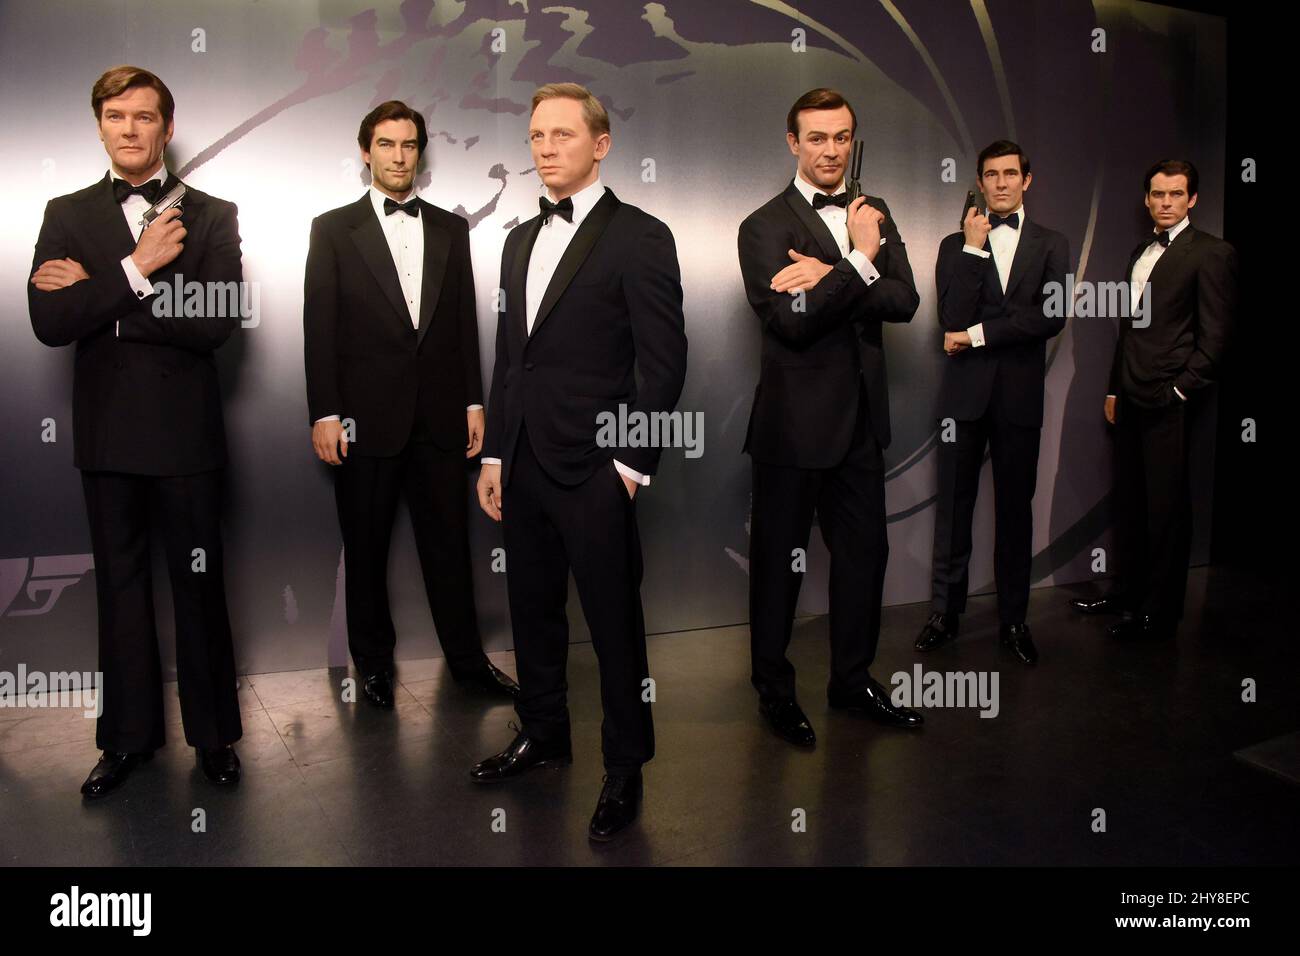 James Bond. Madame Tussauds Hollywood Unveils All Six 'James Bonds' in ...